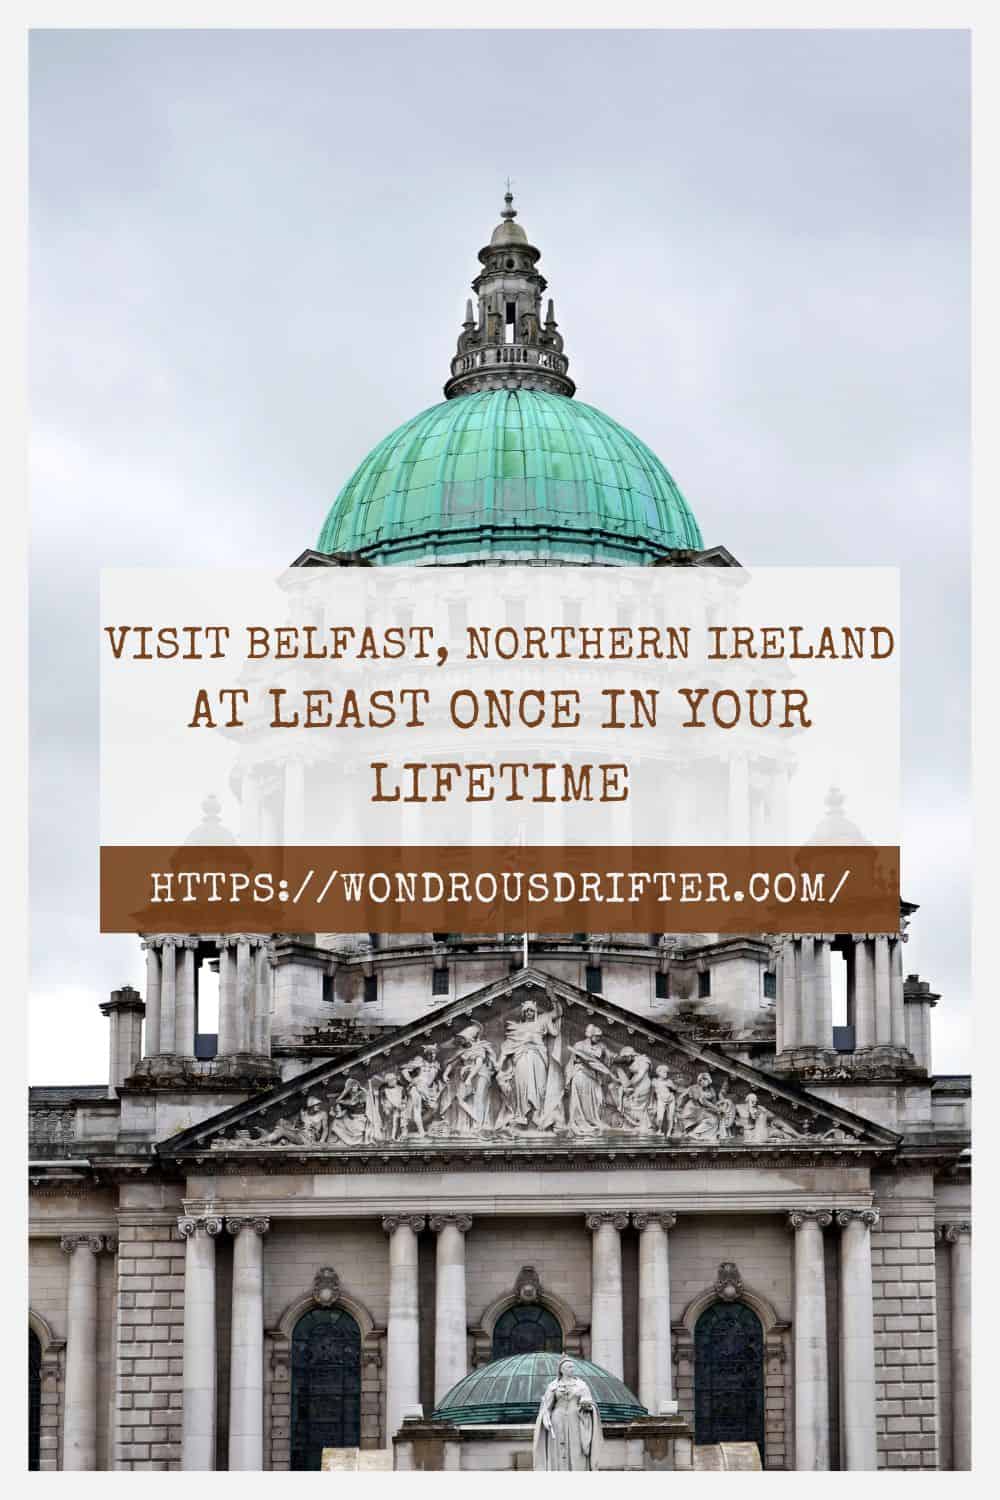 Visit Belfast Northern Ireland at least once in your lifetime